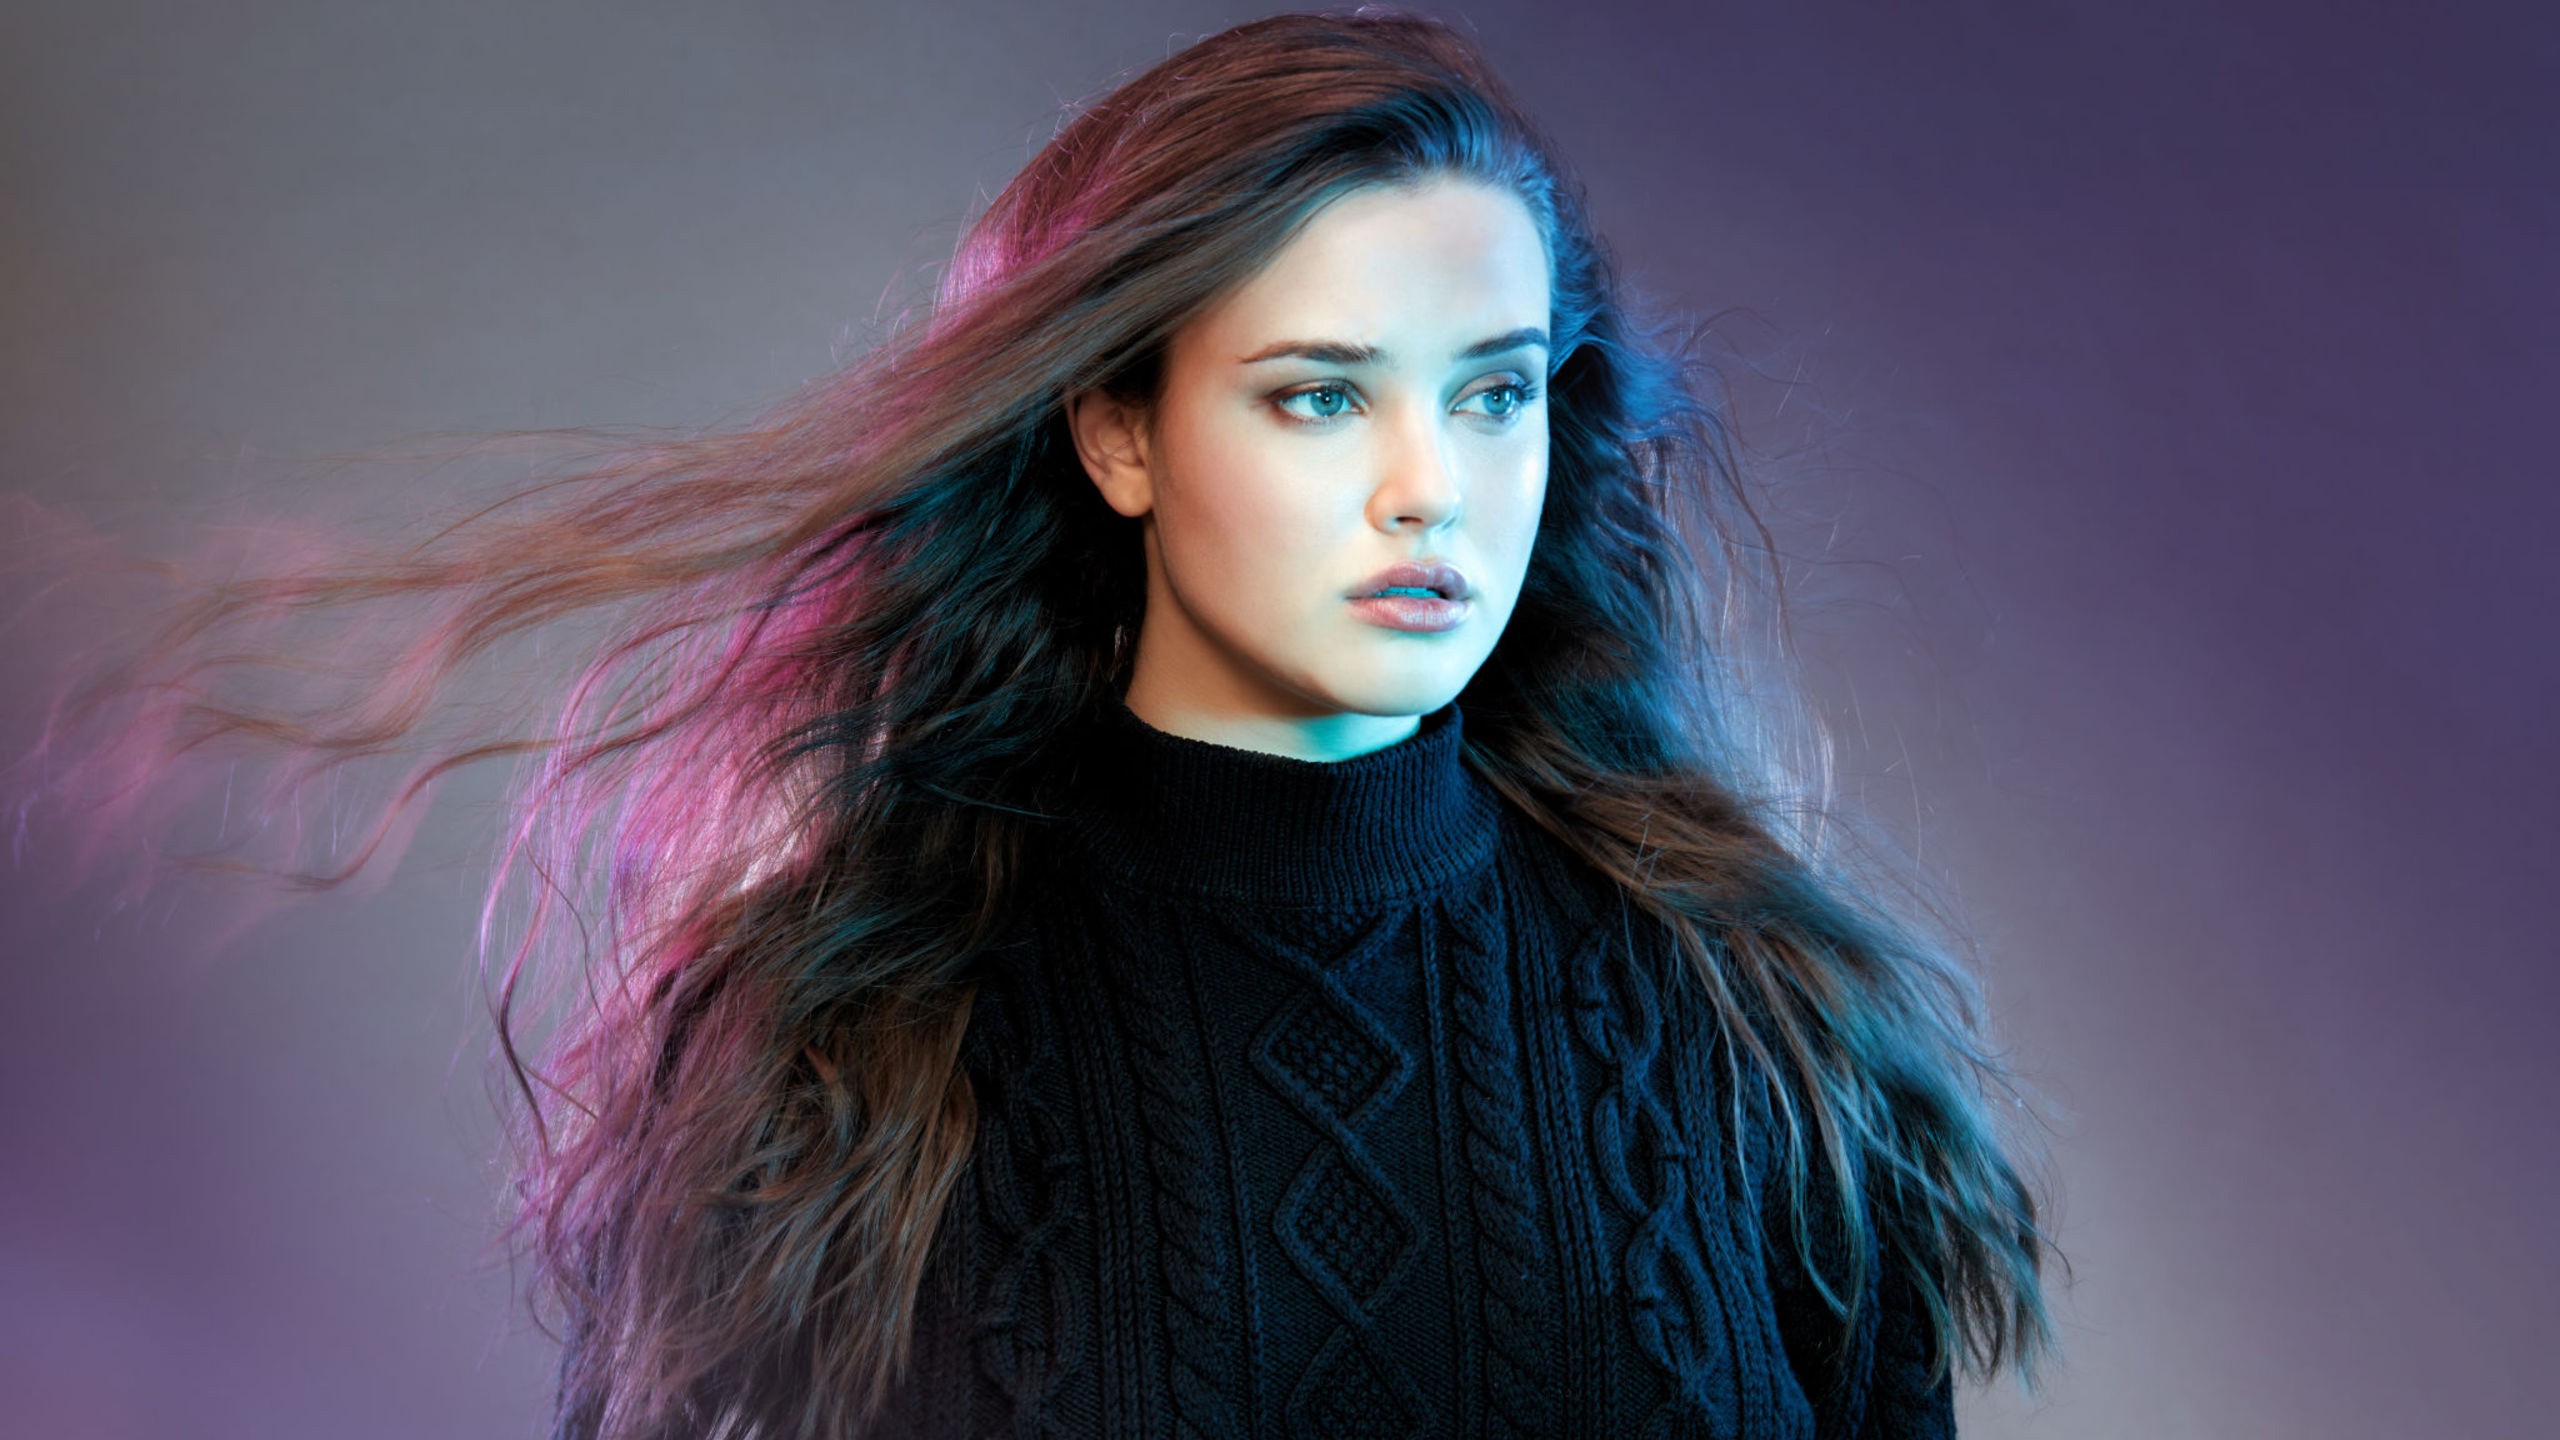 Katherine Langford Model Brunette Actress Sweater Black Sweater Long Hair Looking Into The Distance  2560x1440